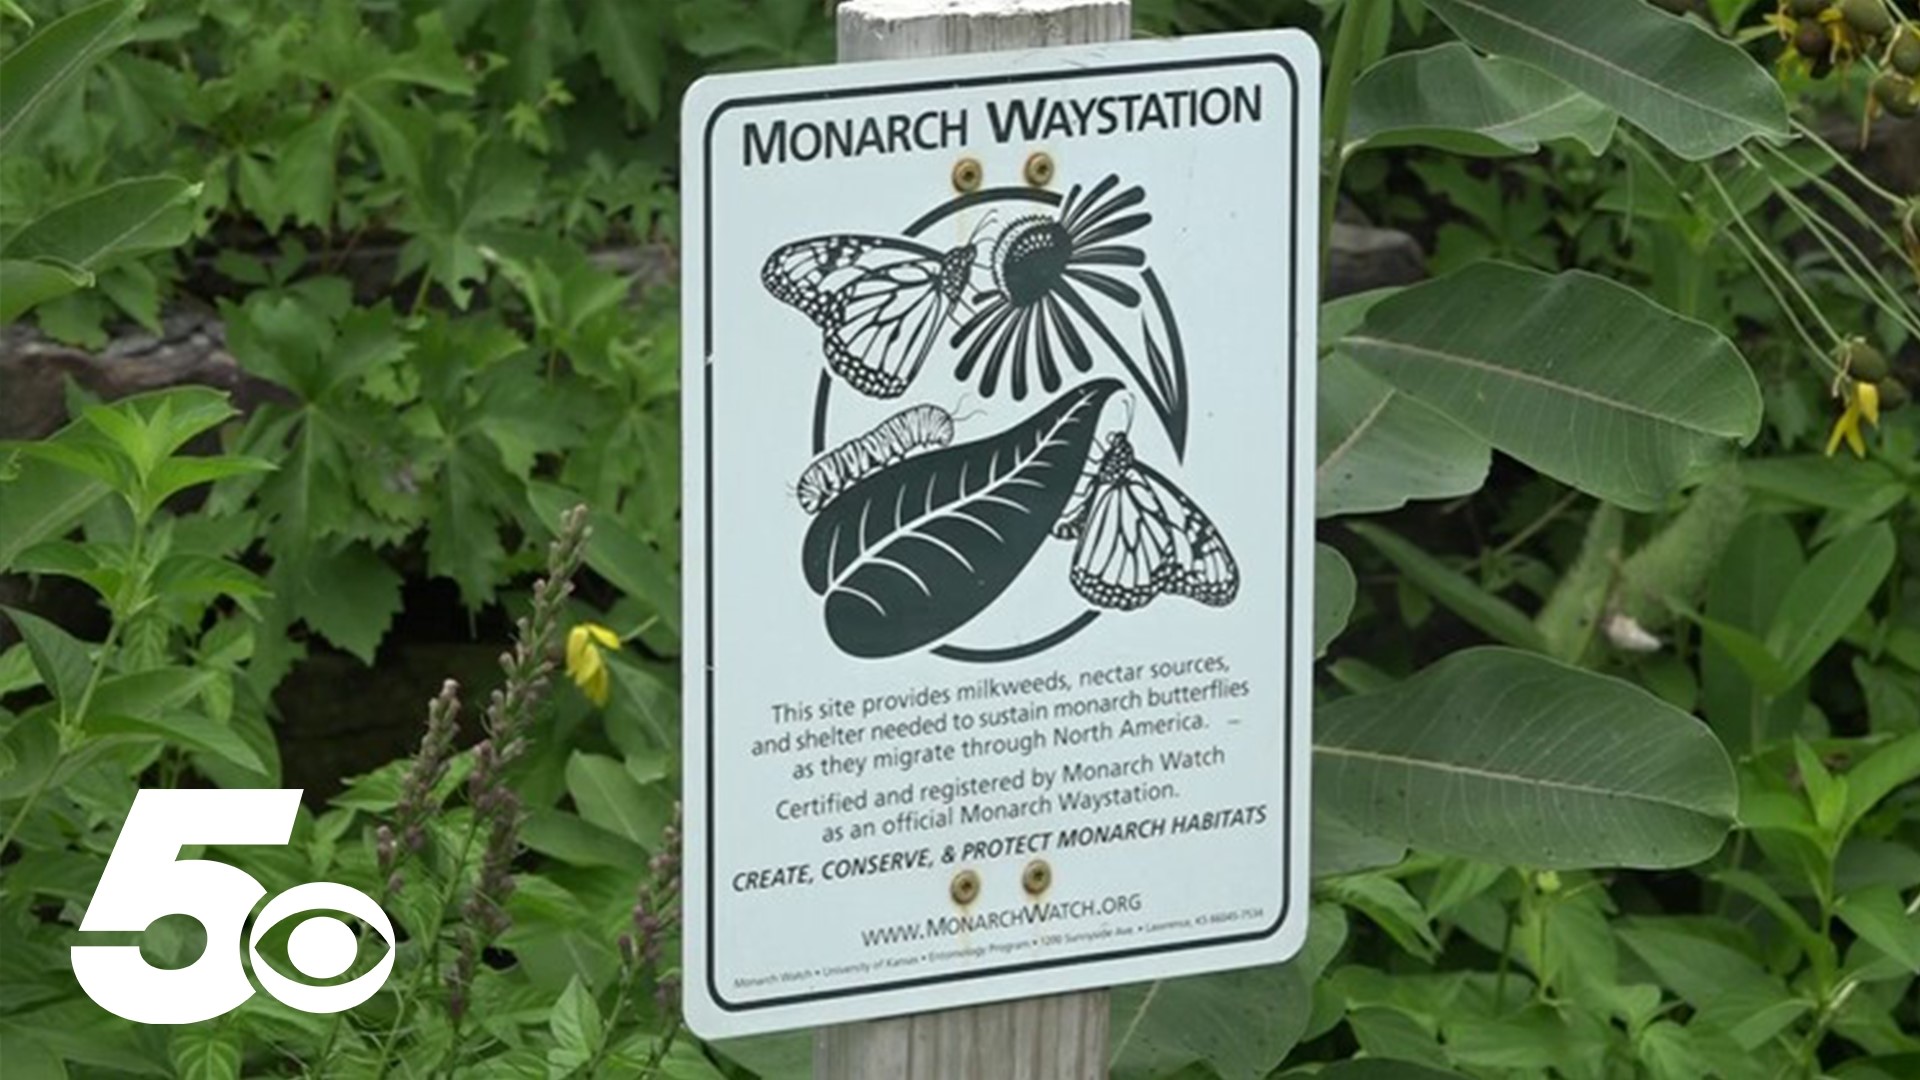 The monarch butterfly is now in danger of becoming extinct.